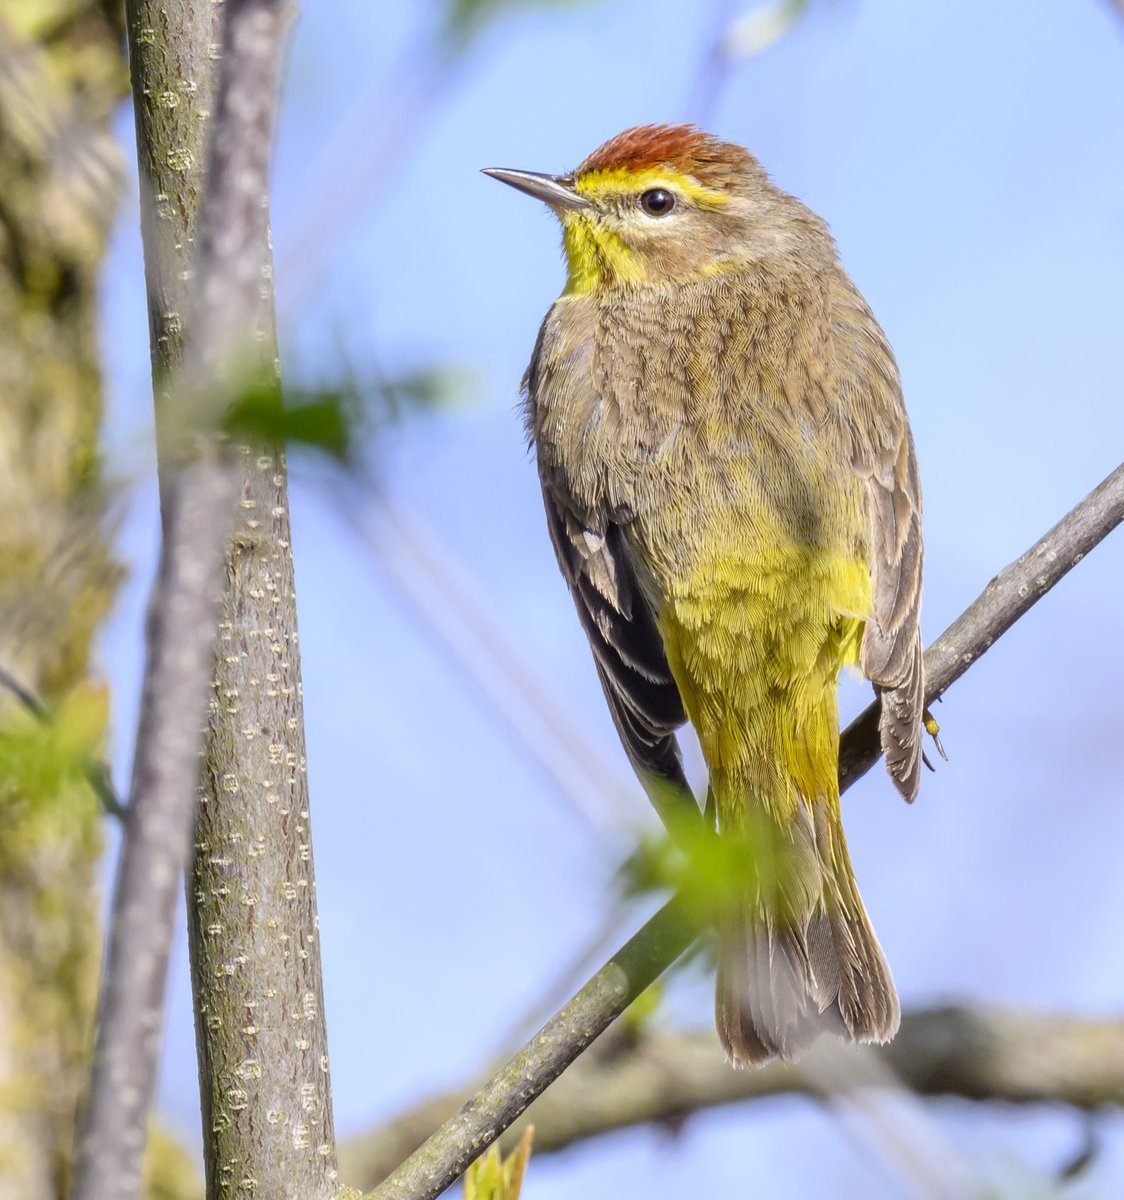 One of the migrating warblers passing through, a Palm Warbler. These warblers wag their tail feathers which I have found to be very helpful in identifying them, especially when the lighting is poor.